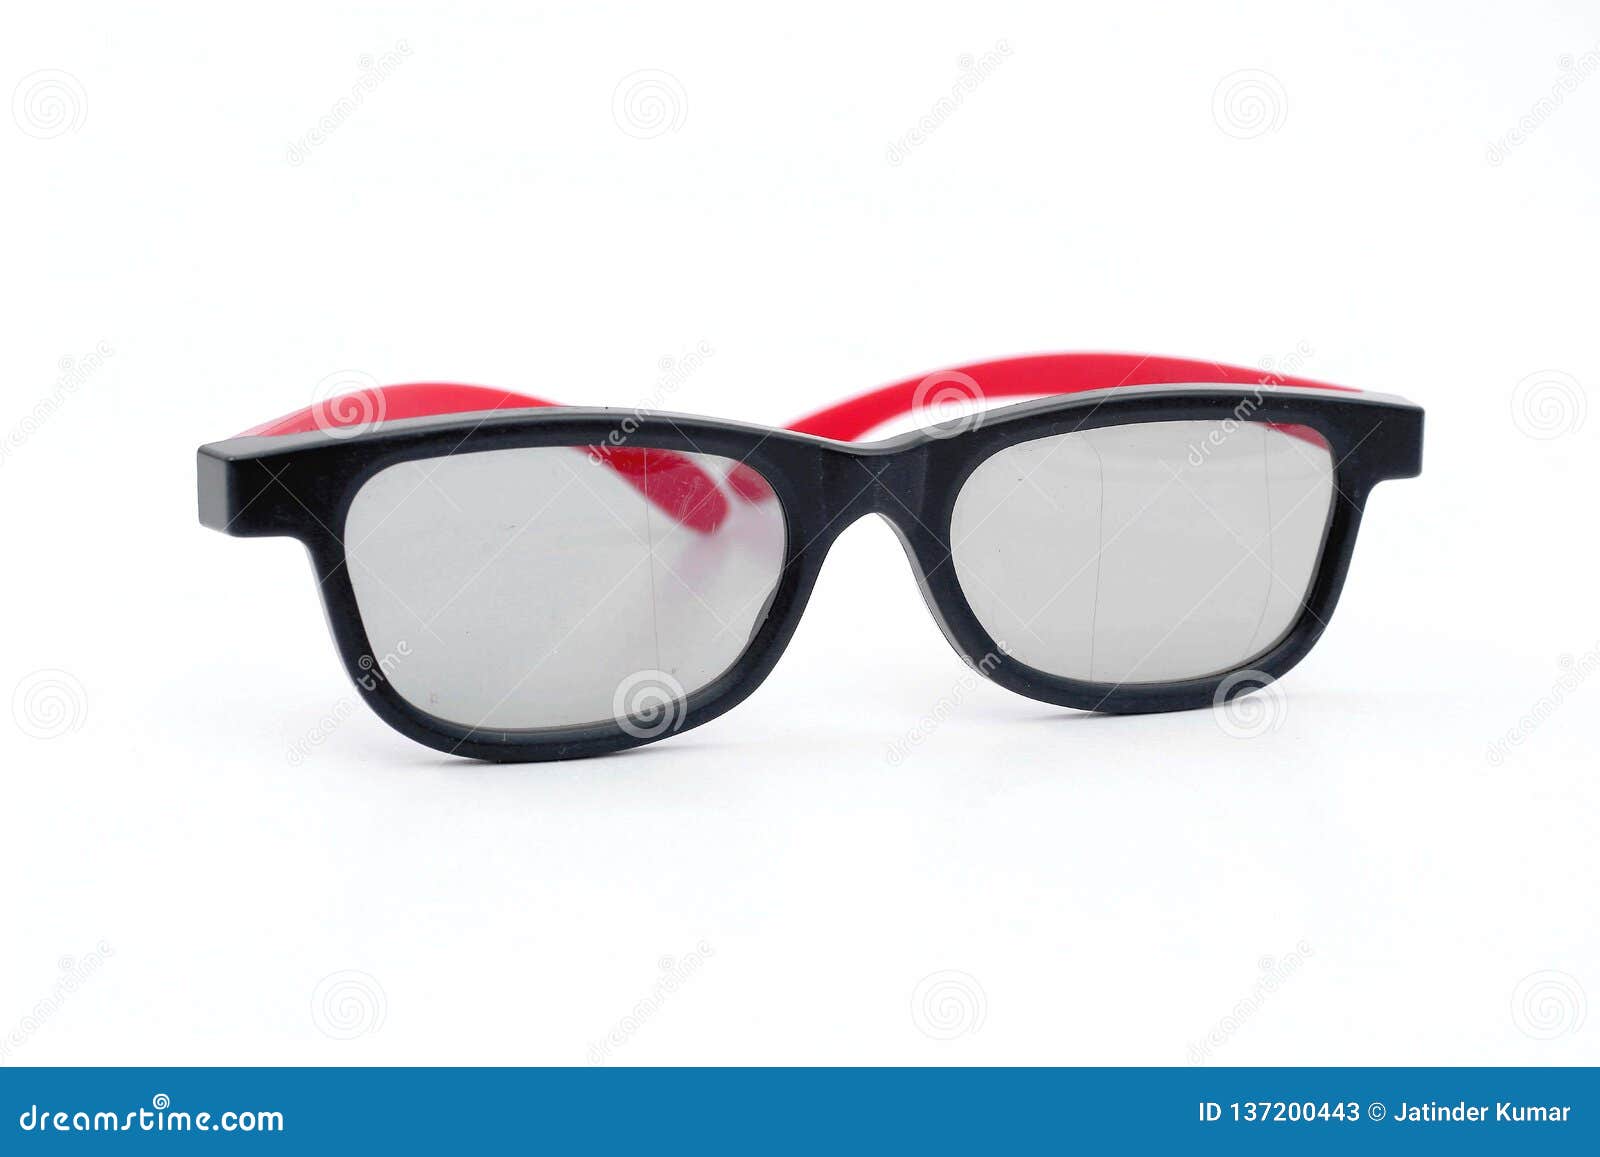 Picture of Black Fashionable Spectacles Stock Image - Image of ...